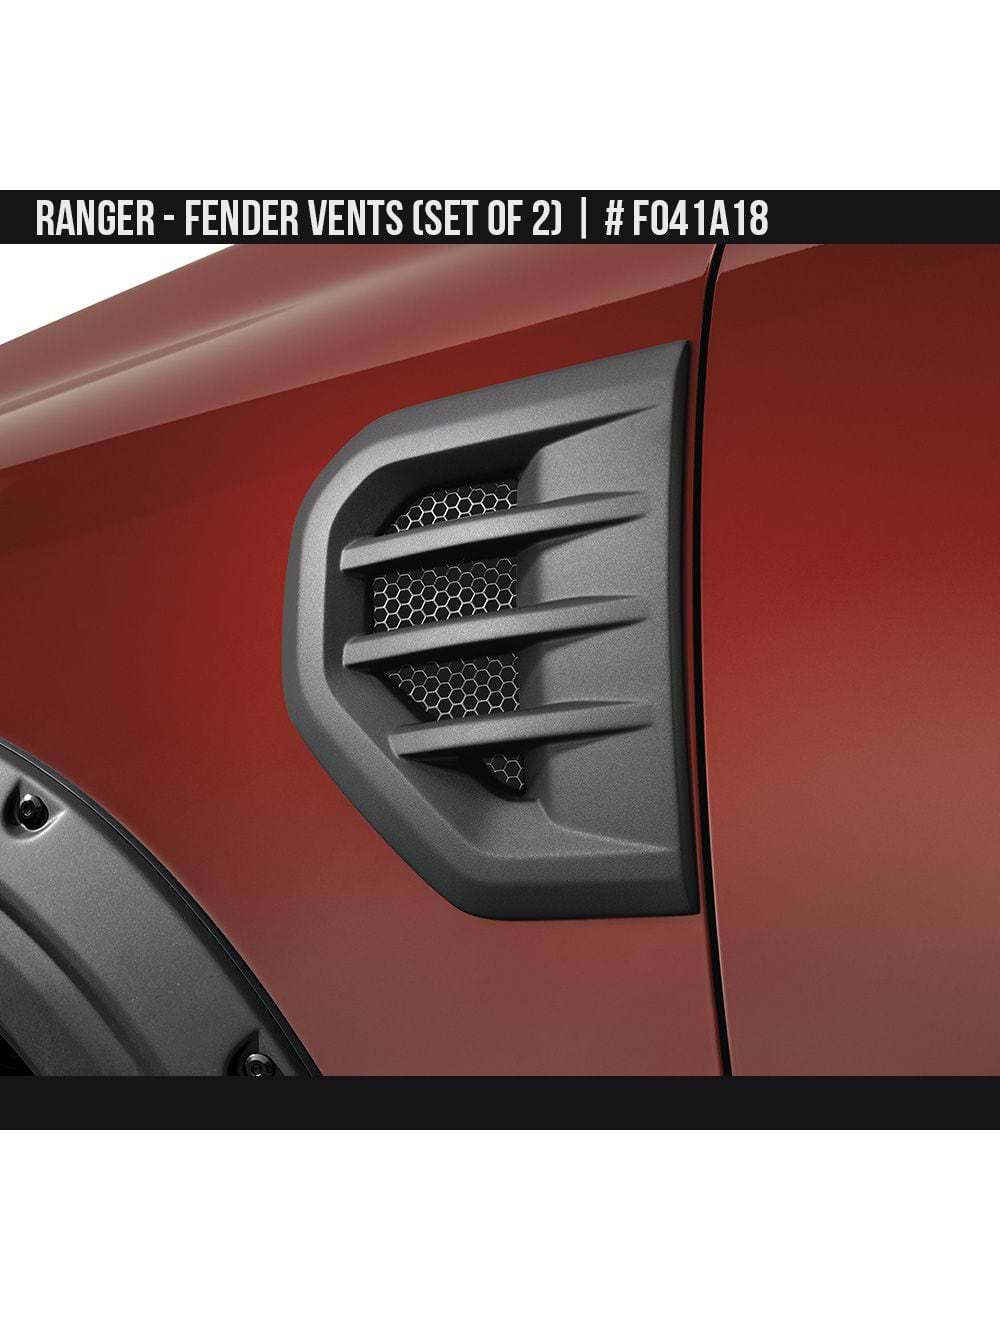 Did you remove your side fender vents?